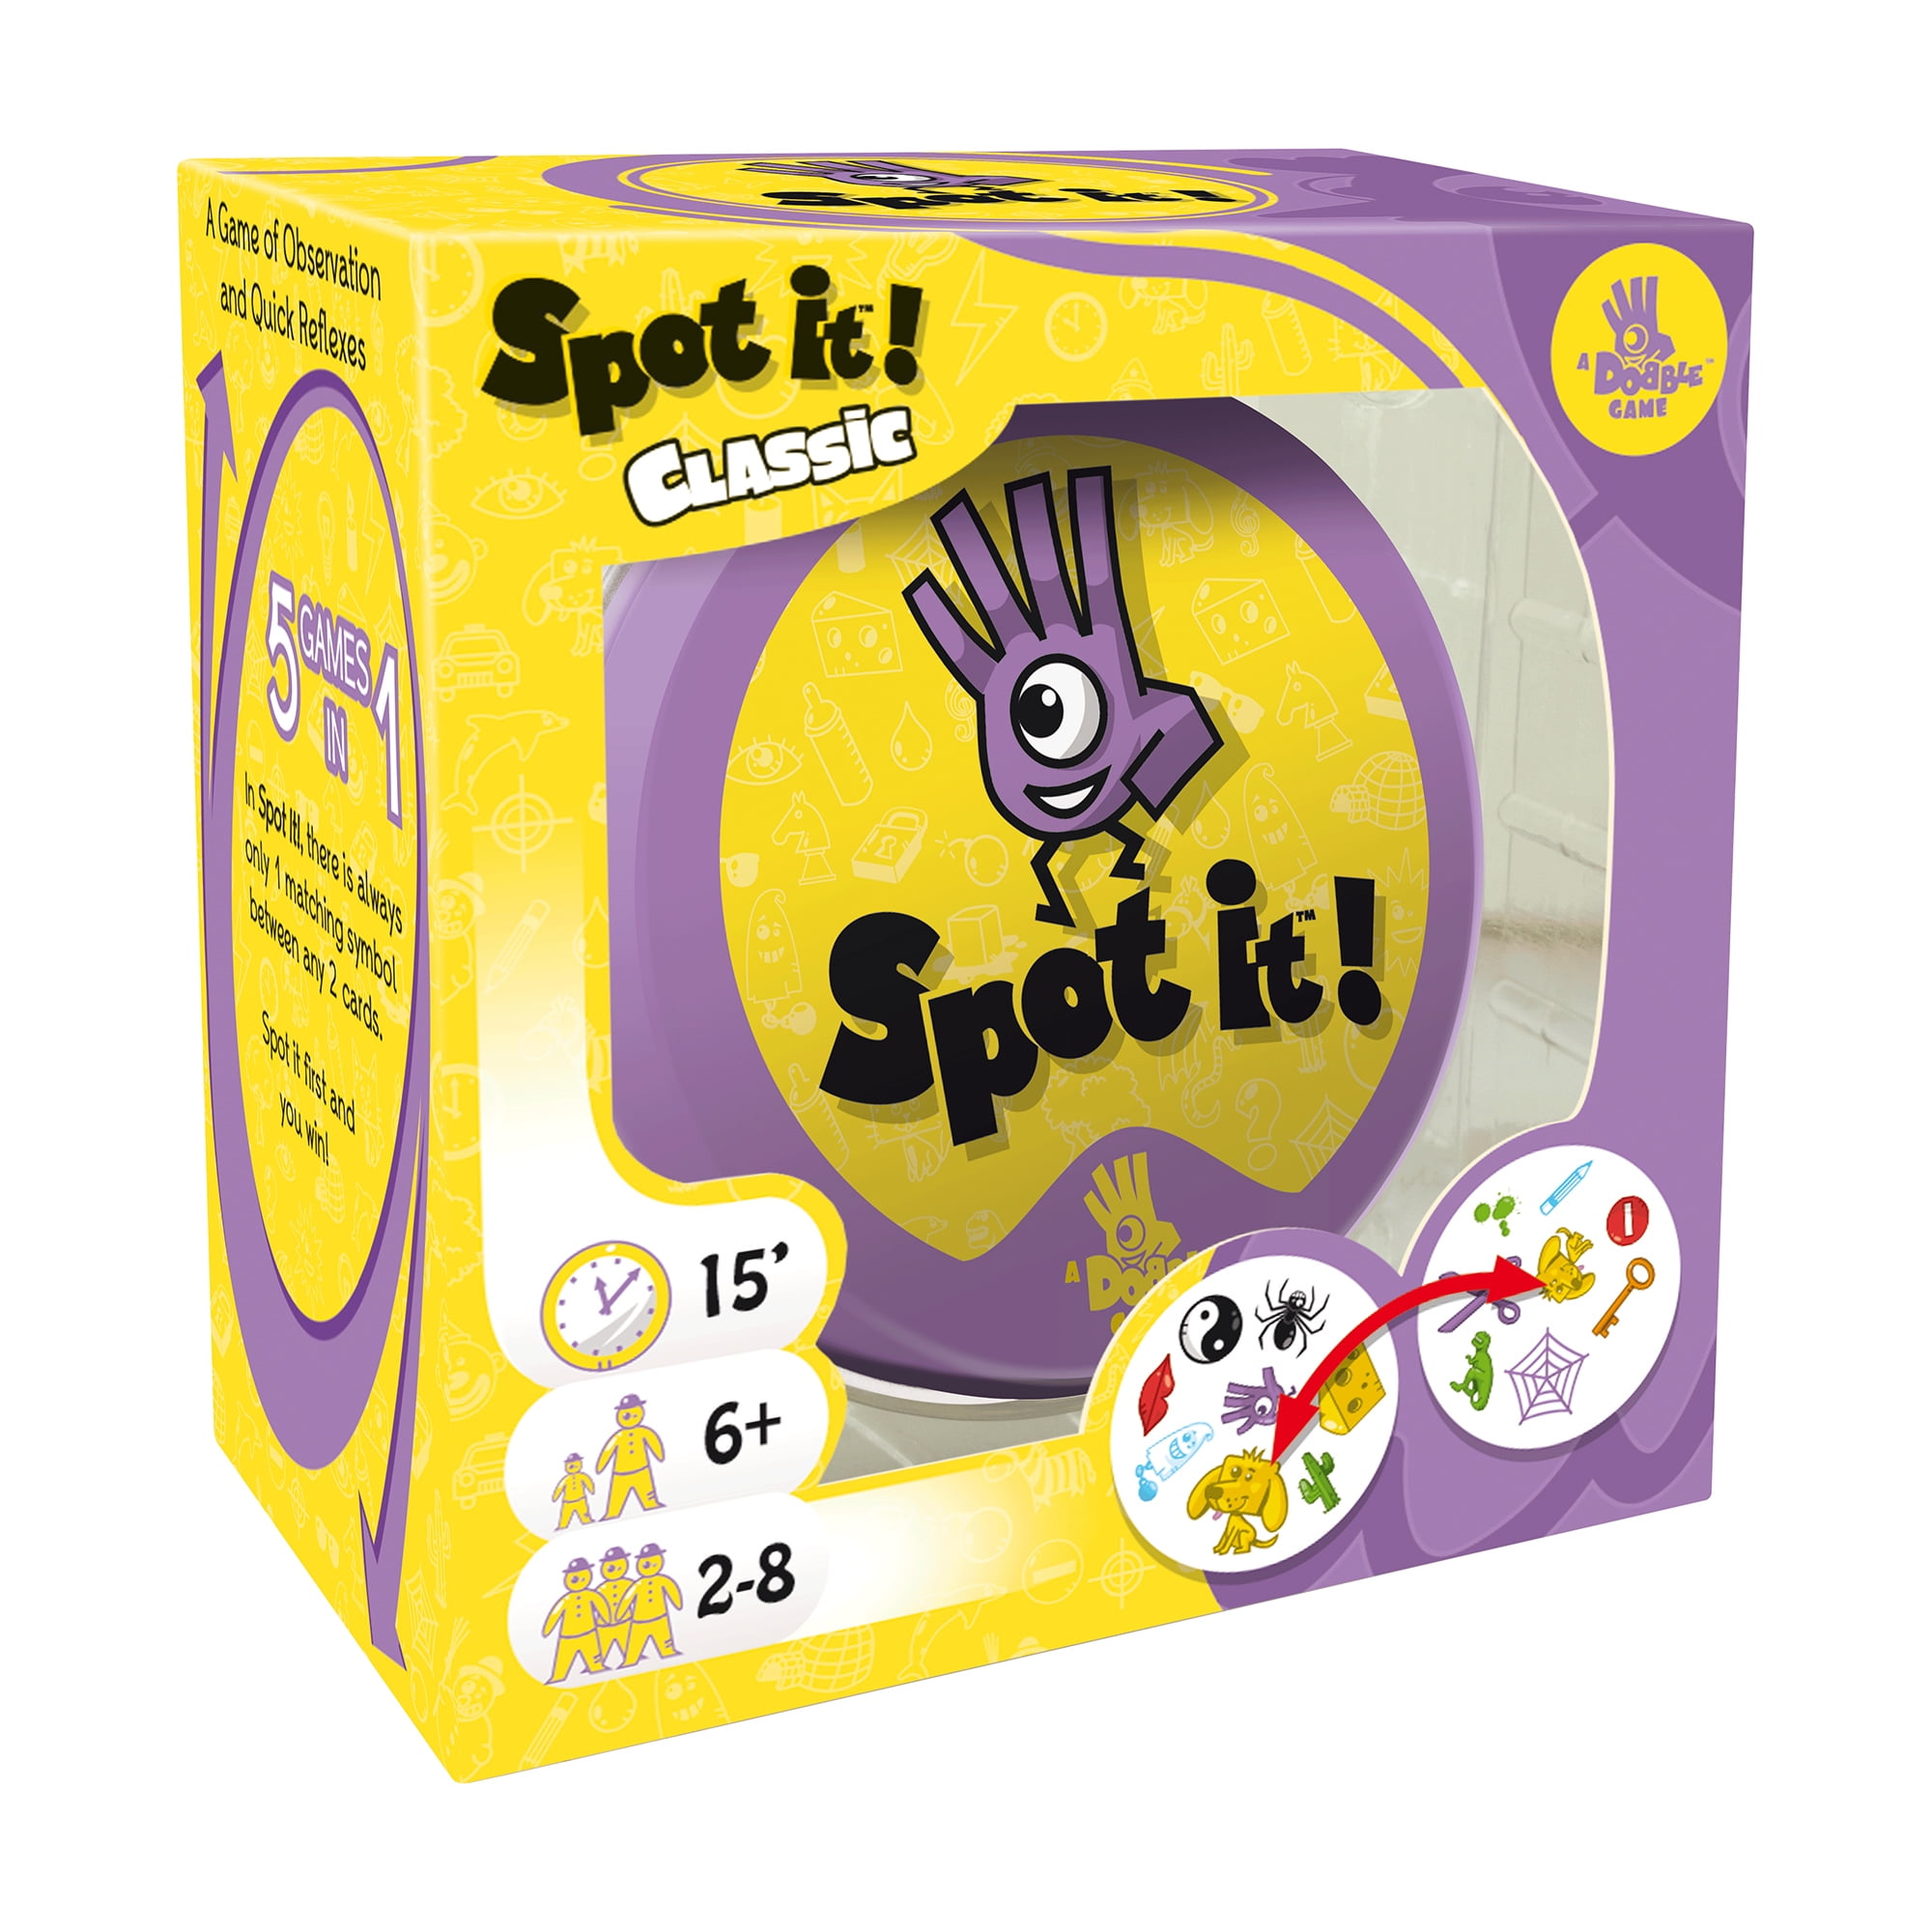 Spot it! Family Card Game for Ages 6 and up, from Asmodee